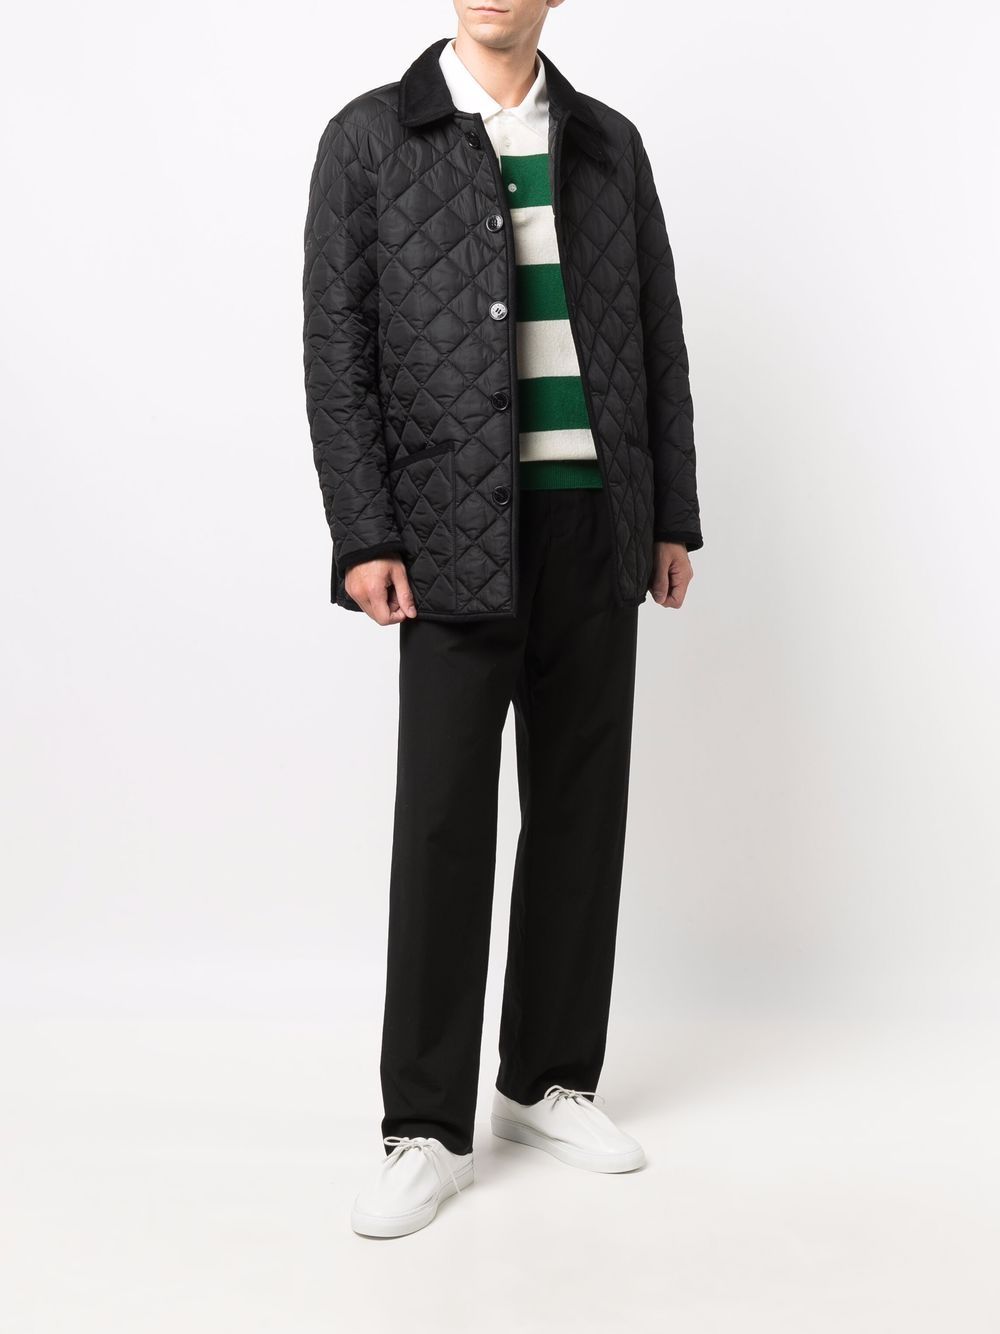 Shop Mackintosh Striped Rugby Shirt In Weiss